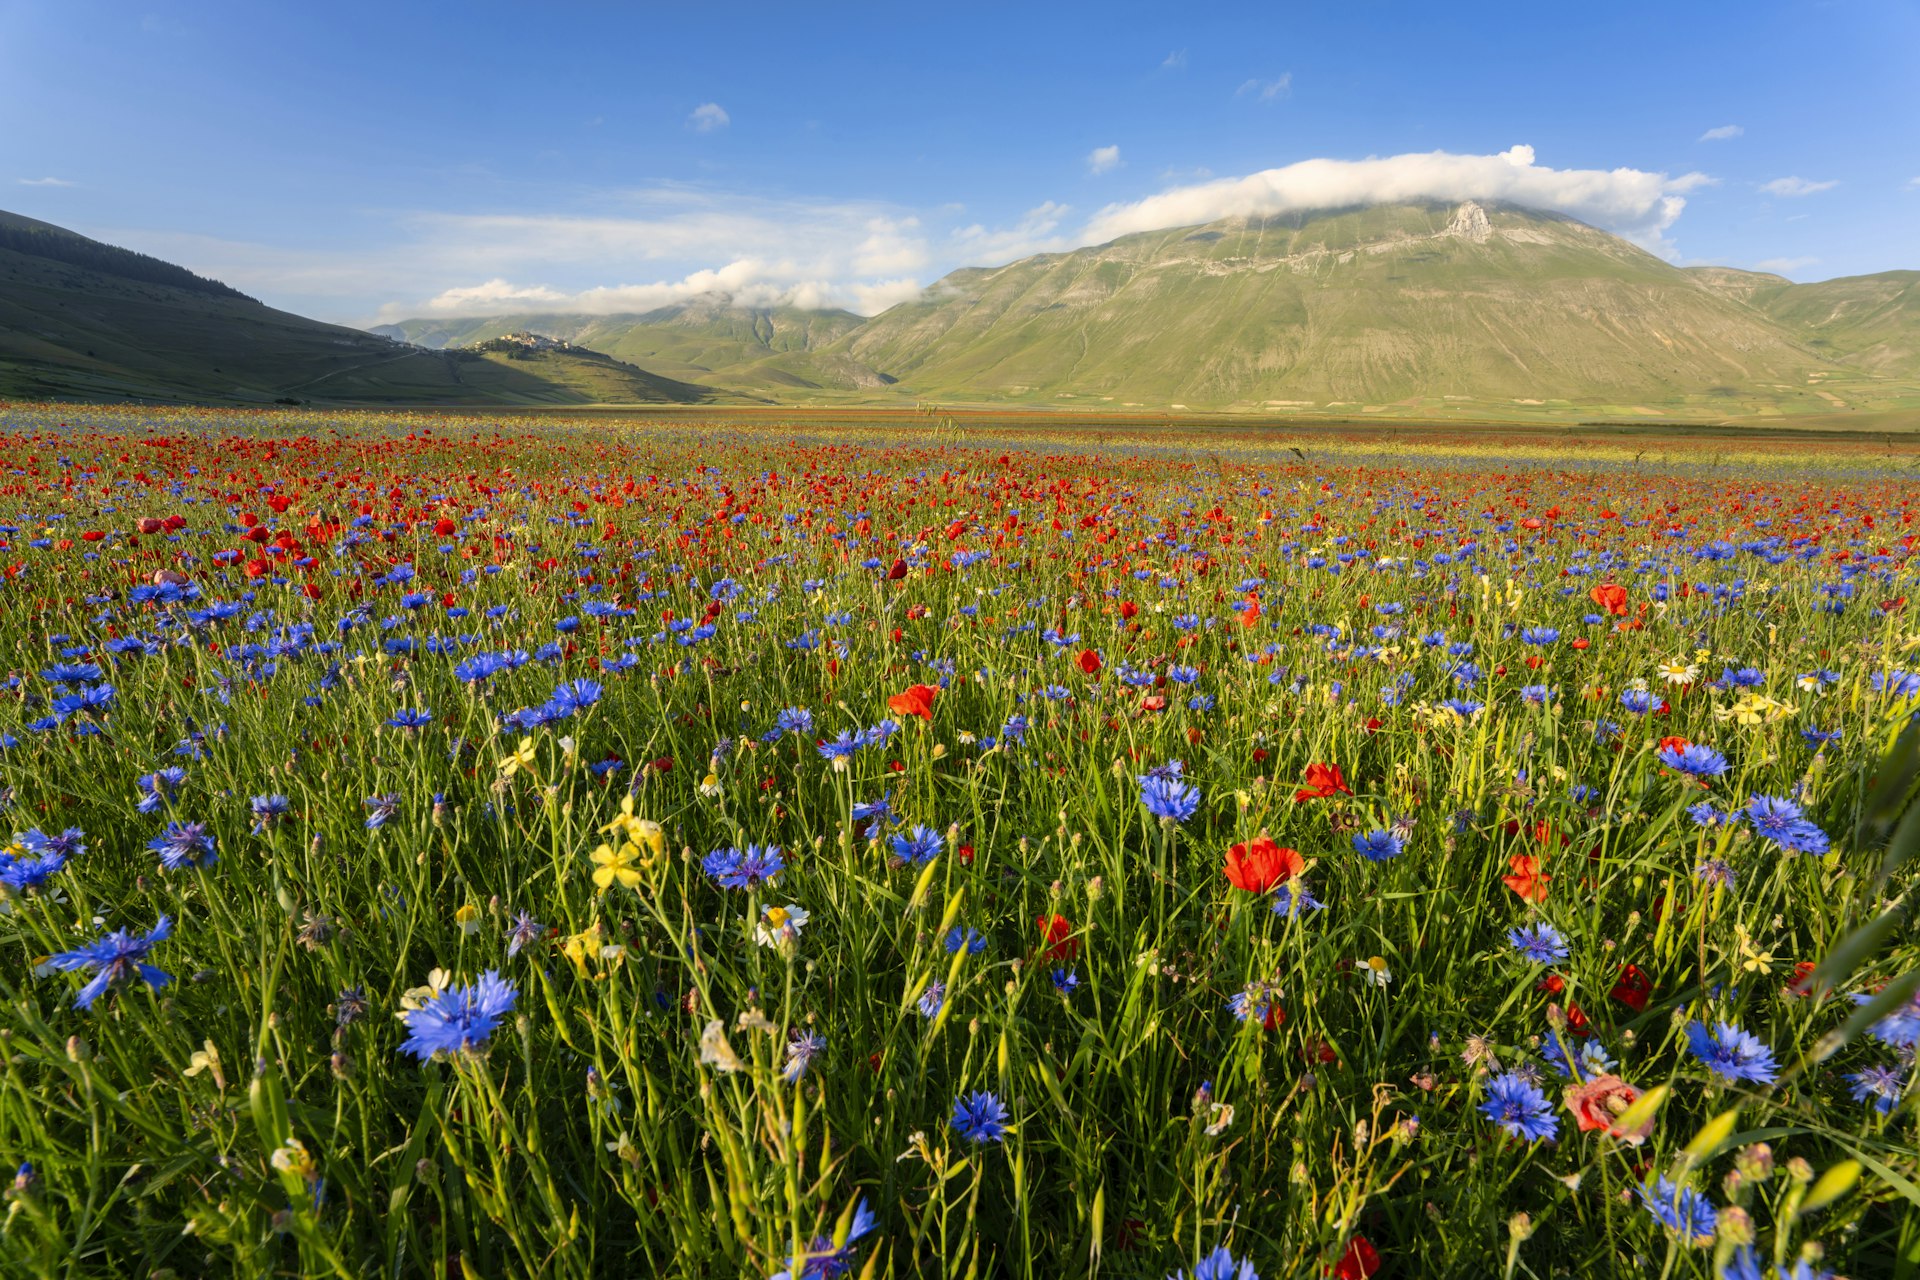 Red and blue wildflowers blooming in Piano Grande plateau in Sibillini National Park, Italy. In the background, a number of towering mountain peaks are visible.